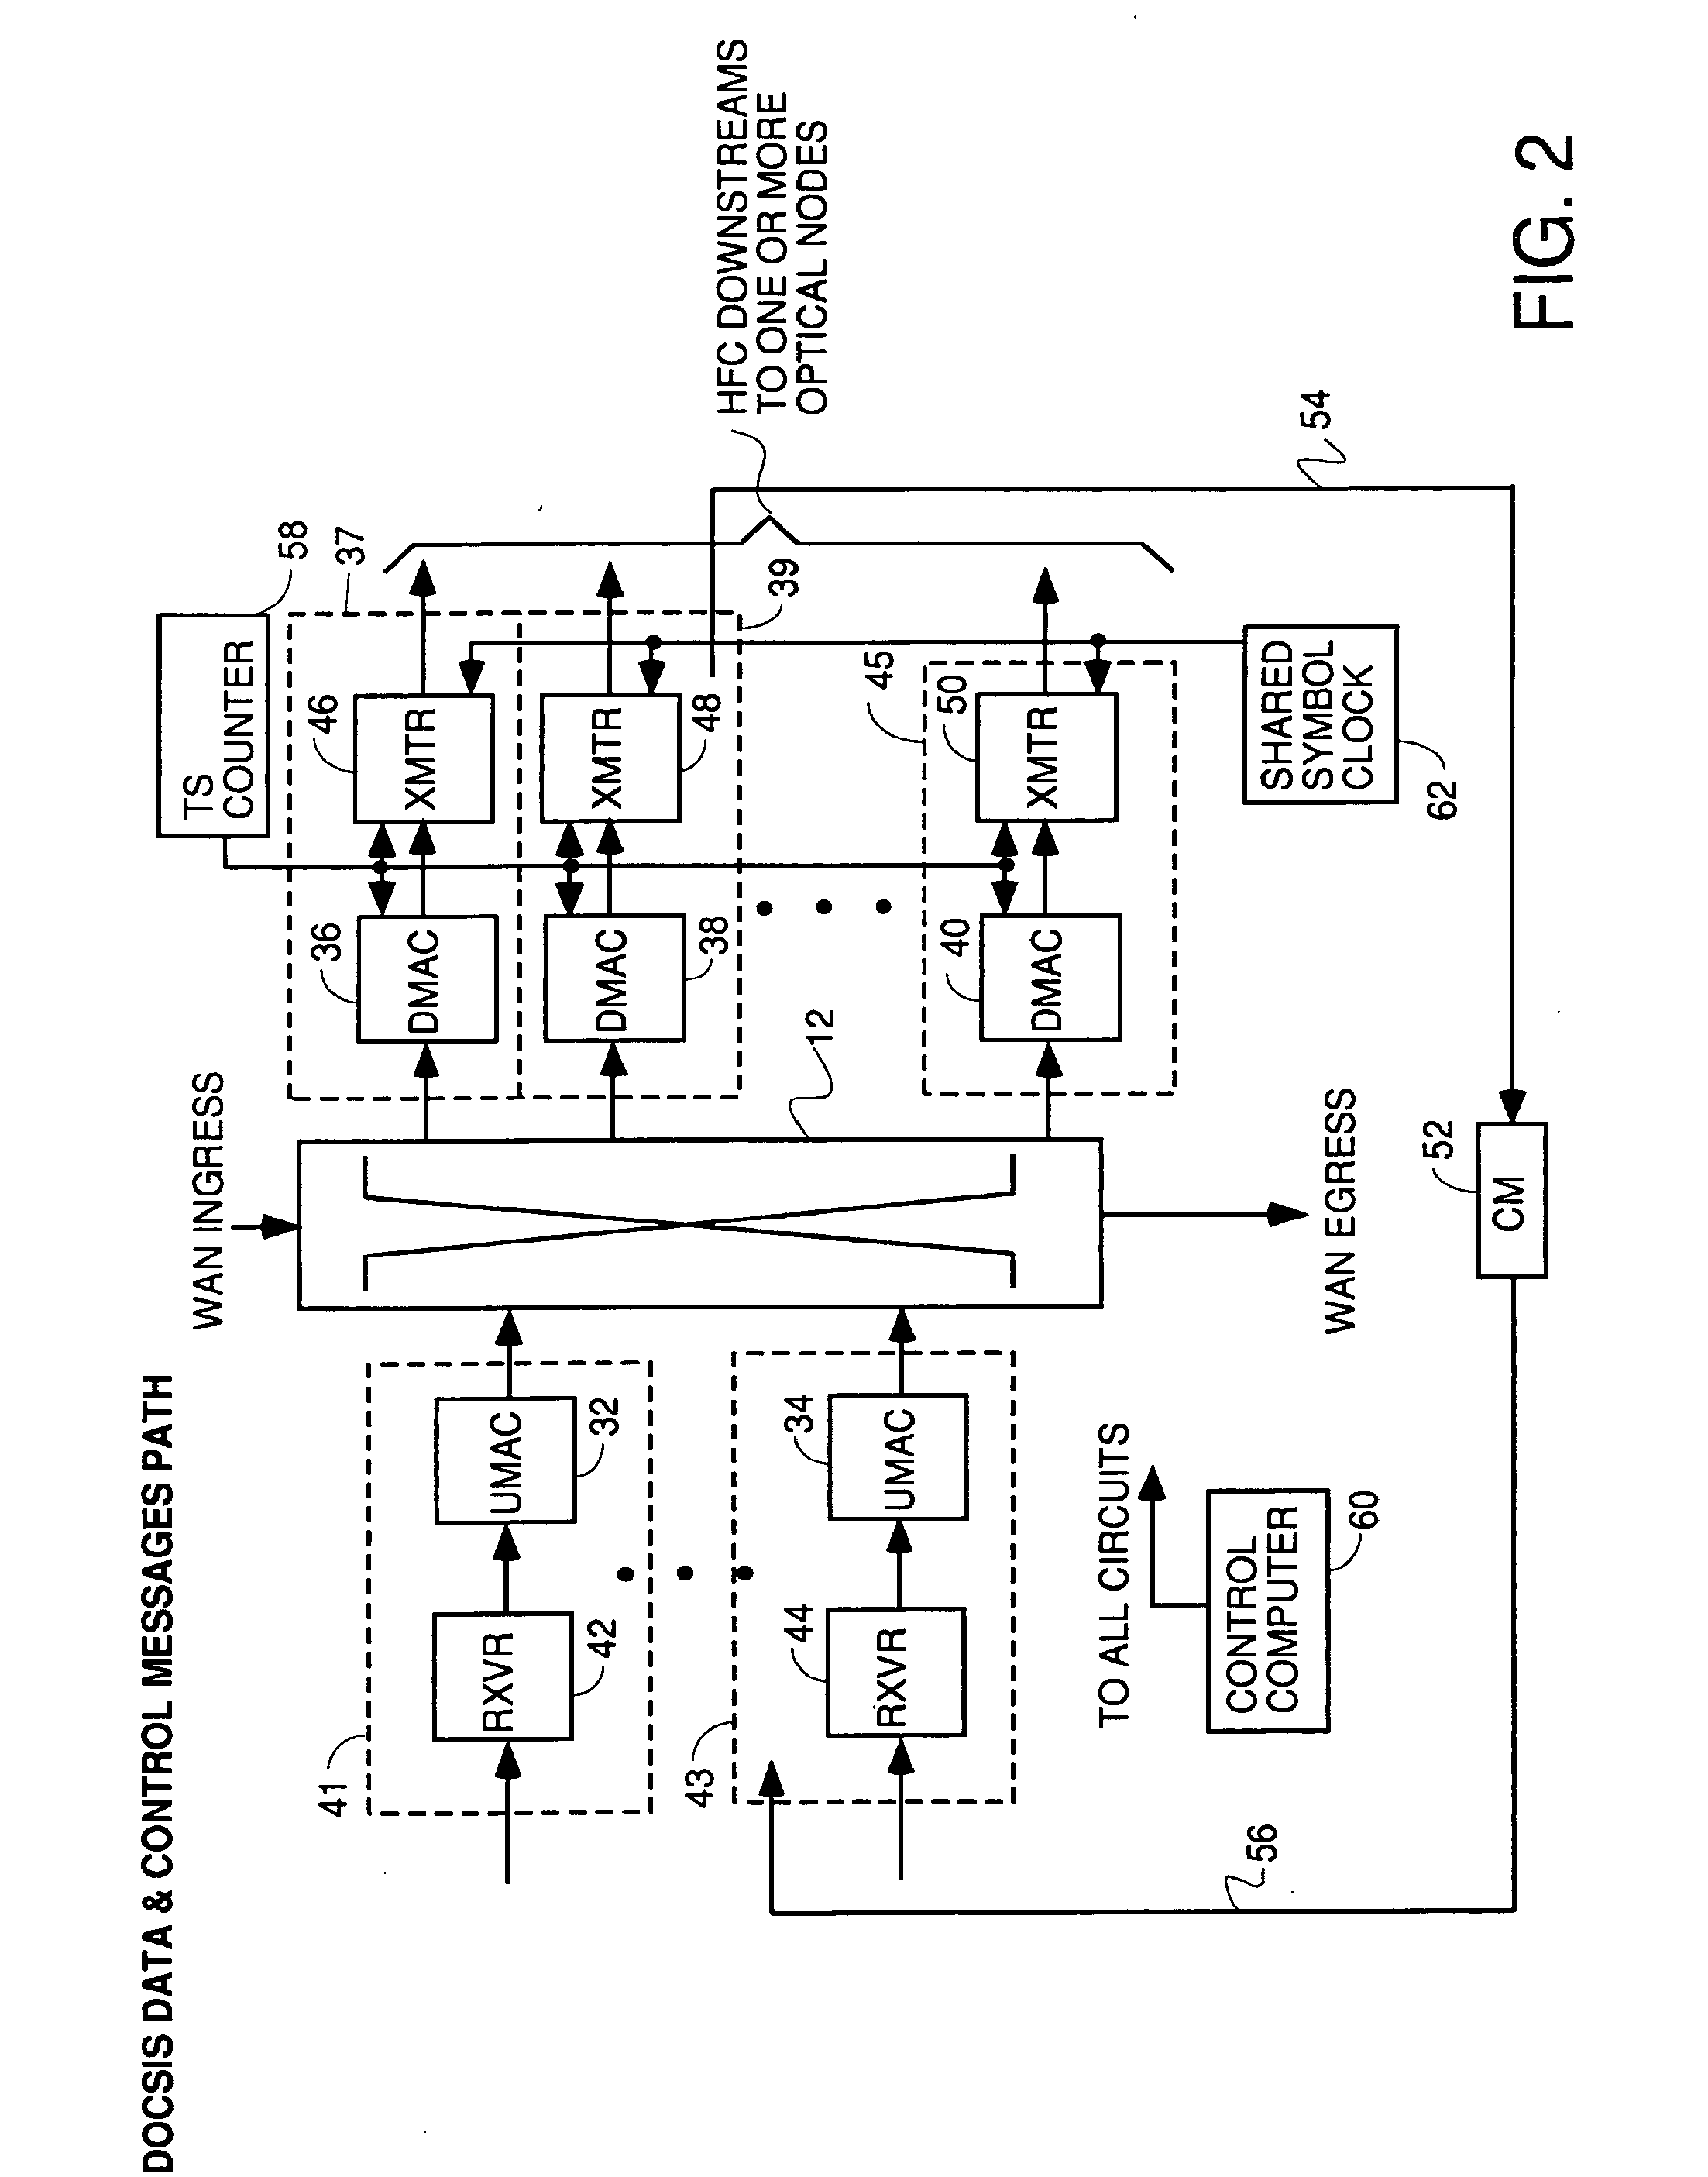 System for low noise aggregation in DOCSIS contention slots in a shared upstream receiver environment